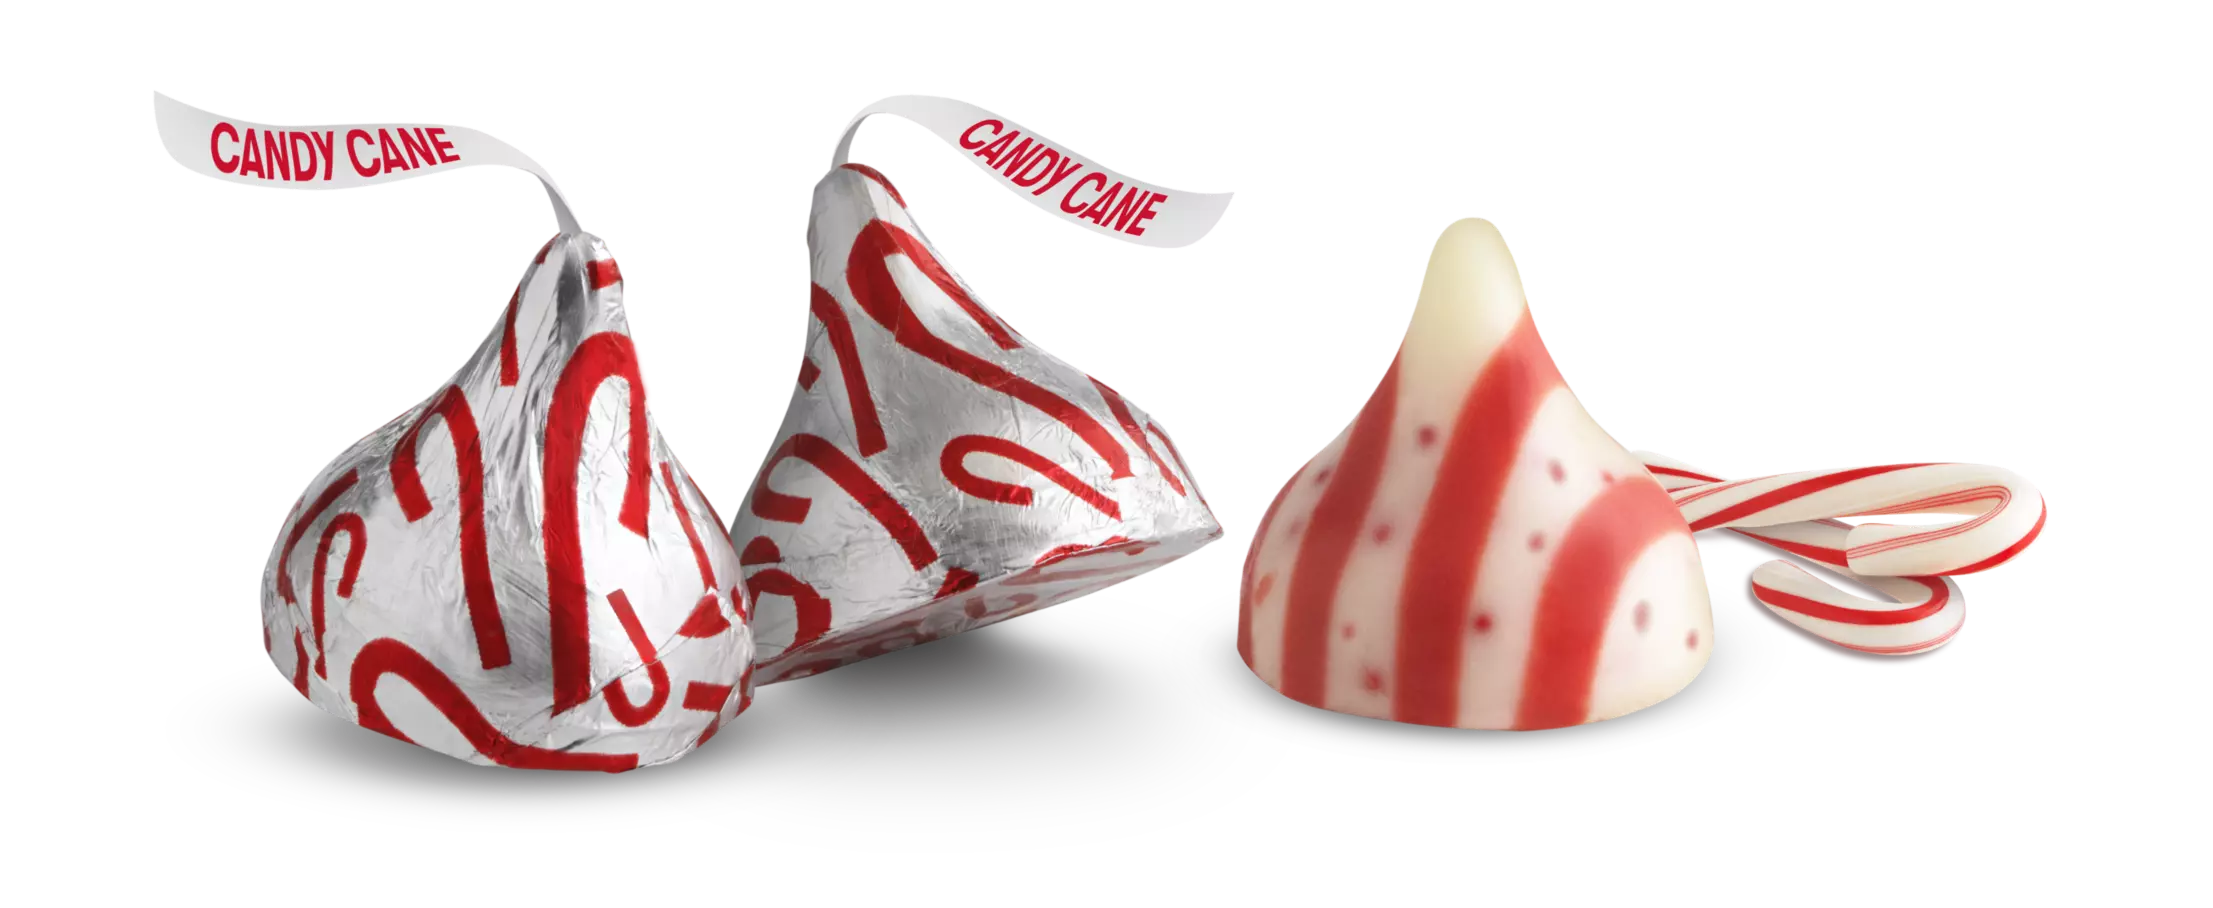 HERSHEY'S KISSES Candy Cane Flavored Mint Candy, 9 oz bag - Out of Package